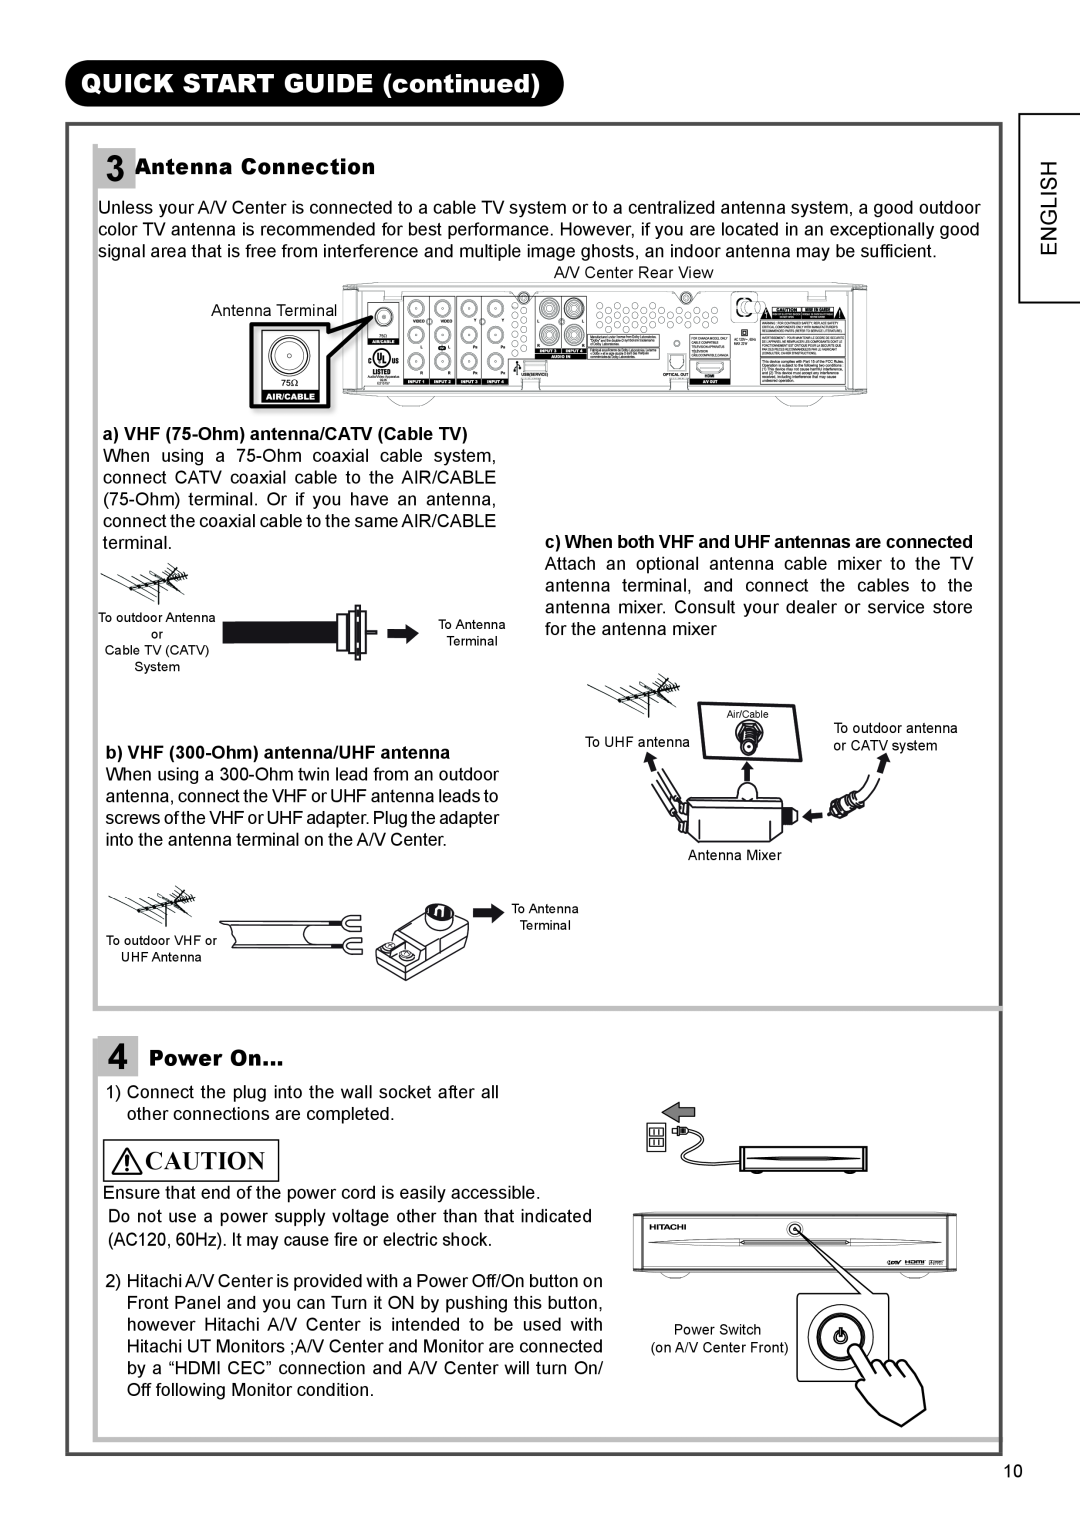 Hitachi AVC01U manual QUICK START GUIDE continued, Antenna Connection, English, Power On 